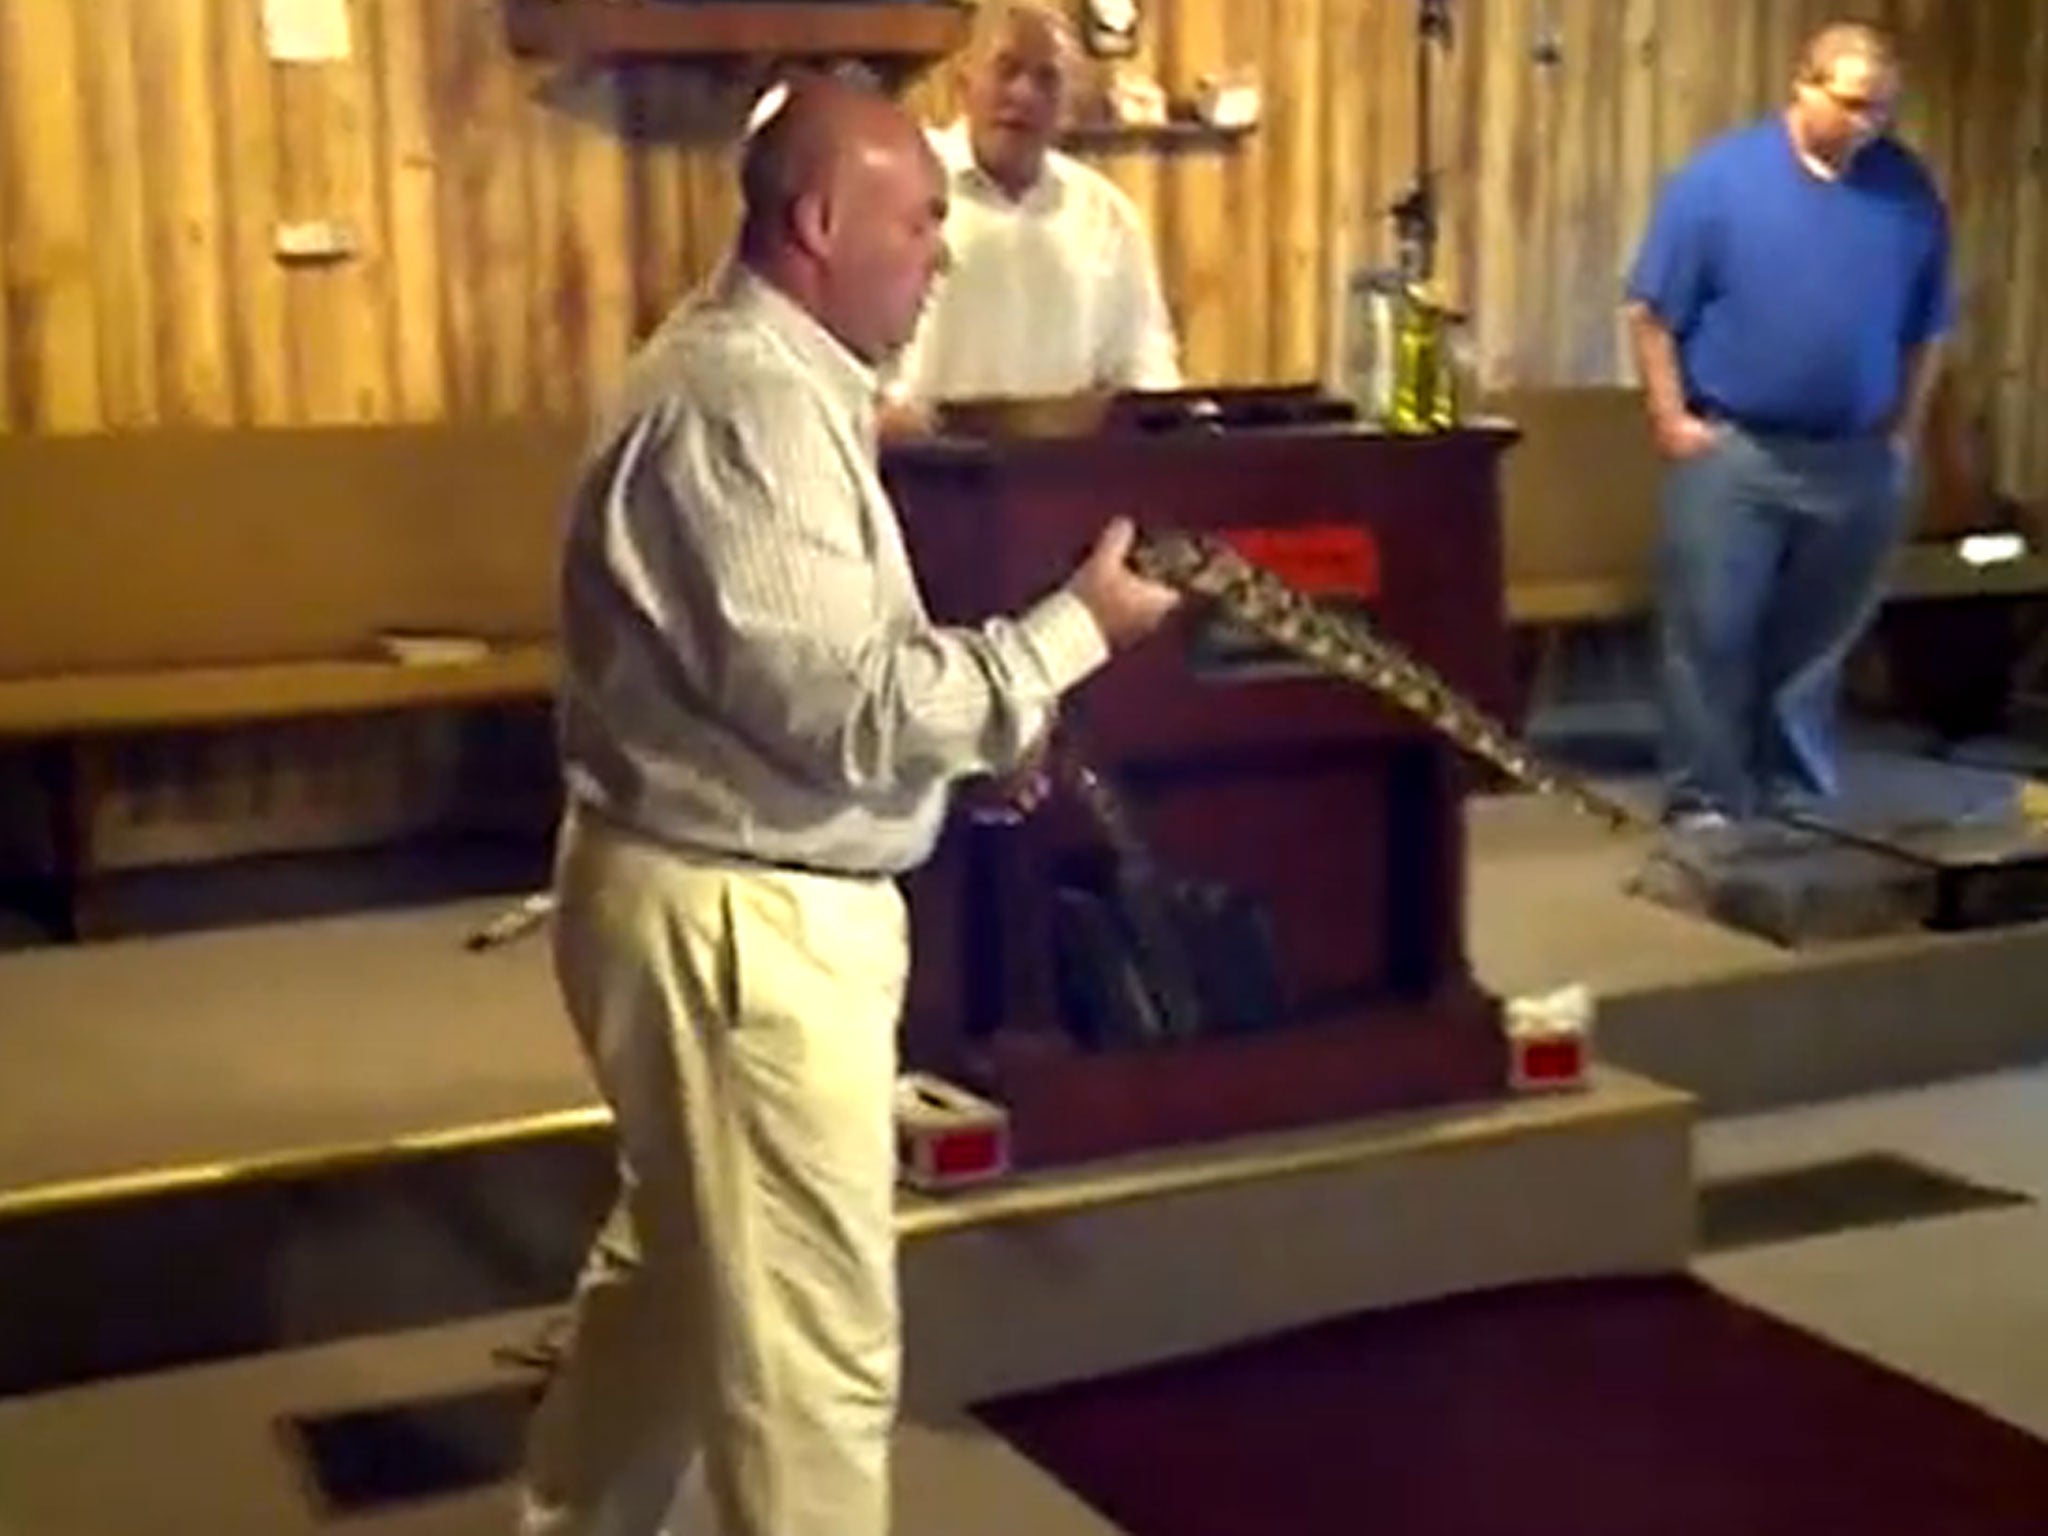 A still from a video showing Jamie Coots handling a snake during a service at Full Gospel Tabernacle In Jesus Name in Middlesboro, Kentucky